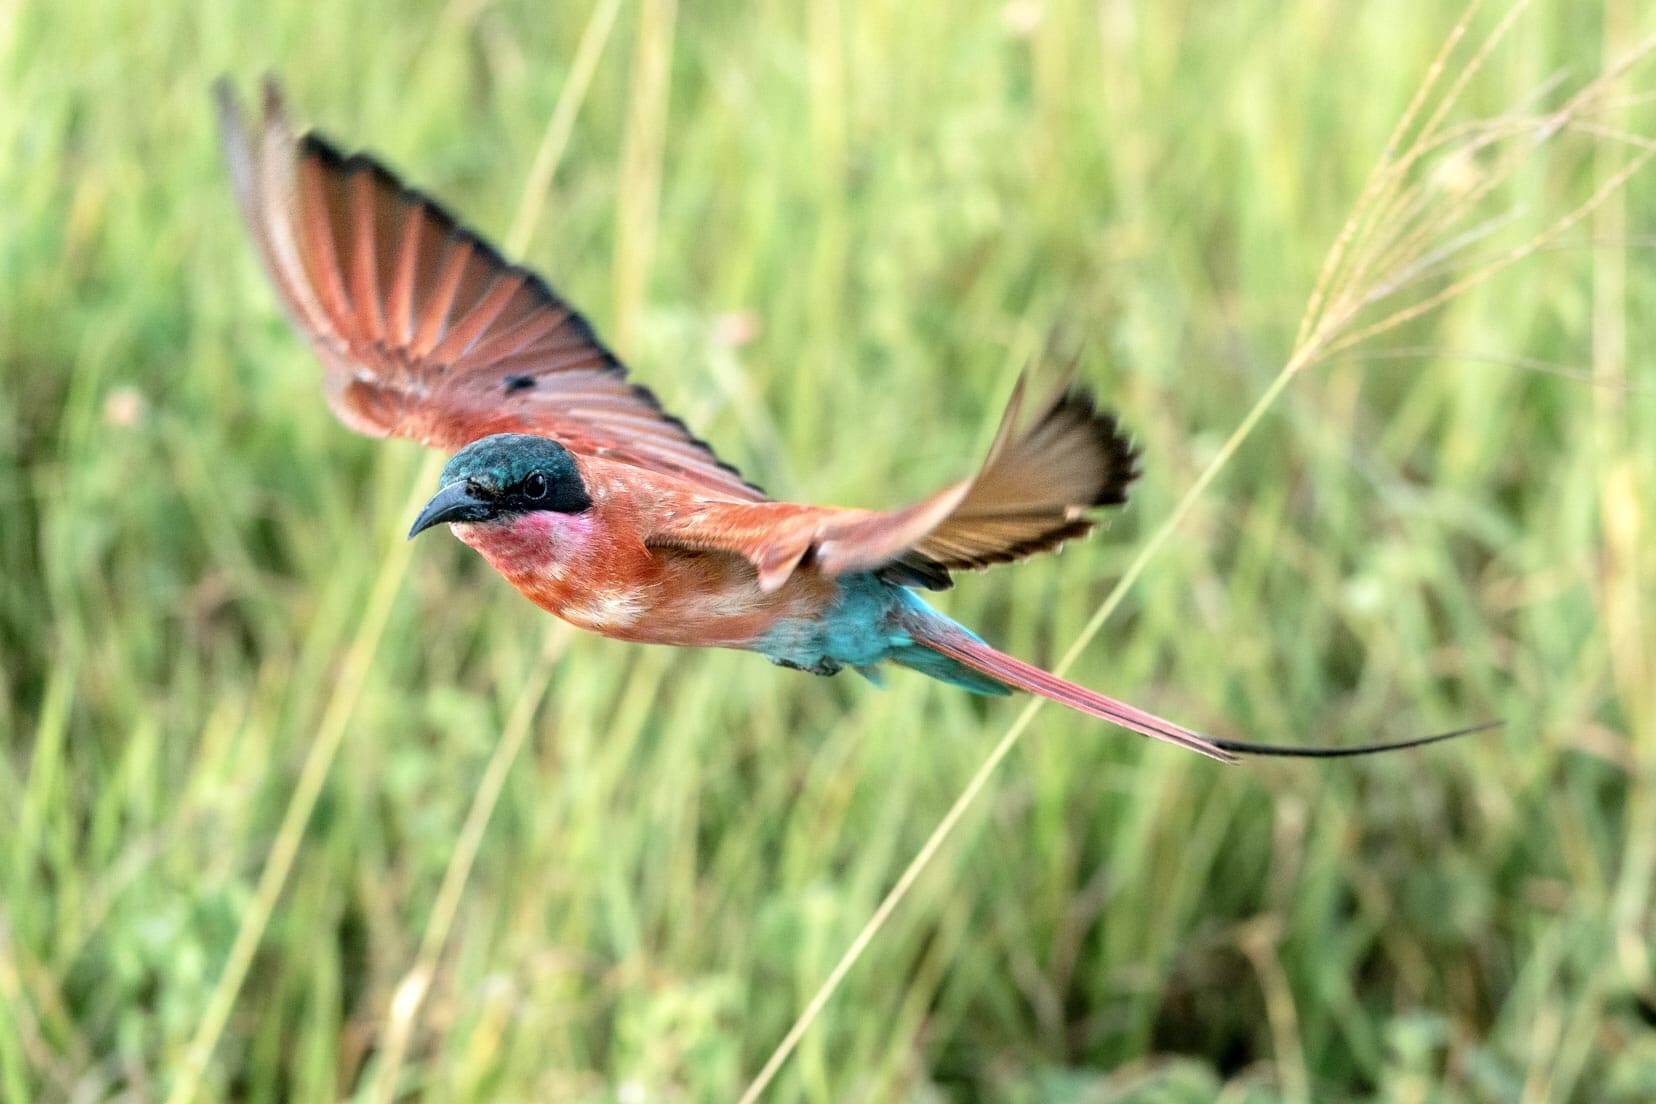 A Southern-Carmine-Bee-eater bird flies over a field and close to the camera